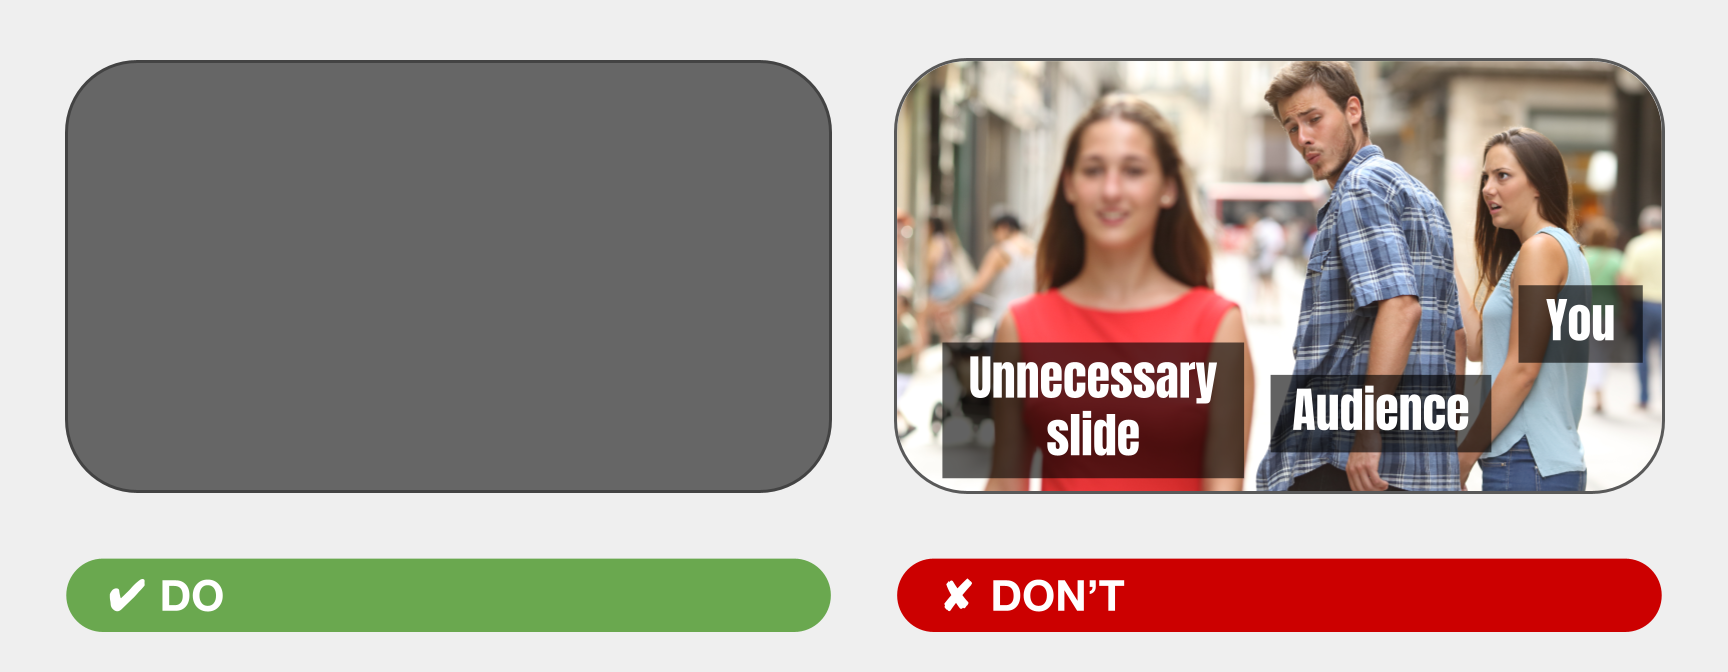 An example of what to do: a blank slide. And a metaphor for what happens if speakers keep unnecessary slides visible: the "distracted boyfriend" meme showing a young woman in the foreground with the text label "Unnecessary slide" a young man in the middle ground looking back at her admiringly with the text label "Audience" and his girlfriend next to him, looking indignantly at him, and she's labeled "You"